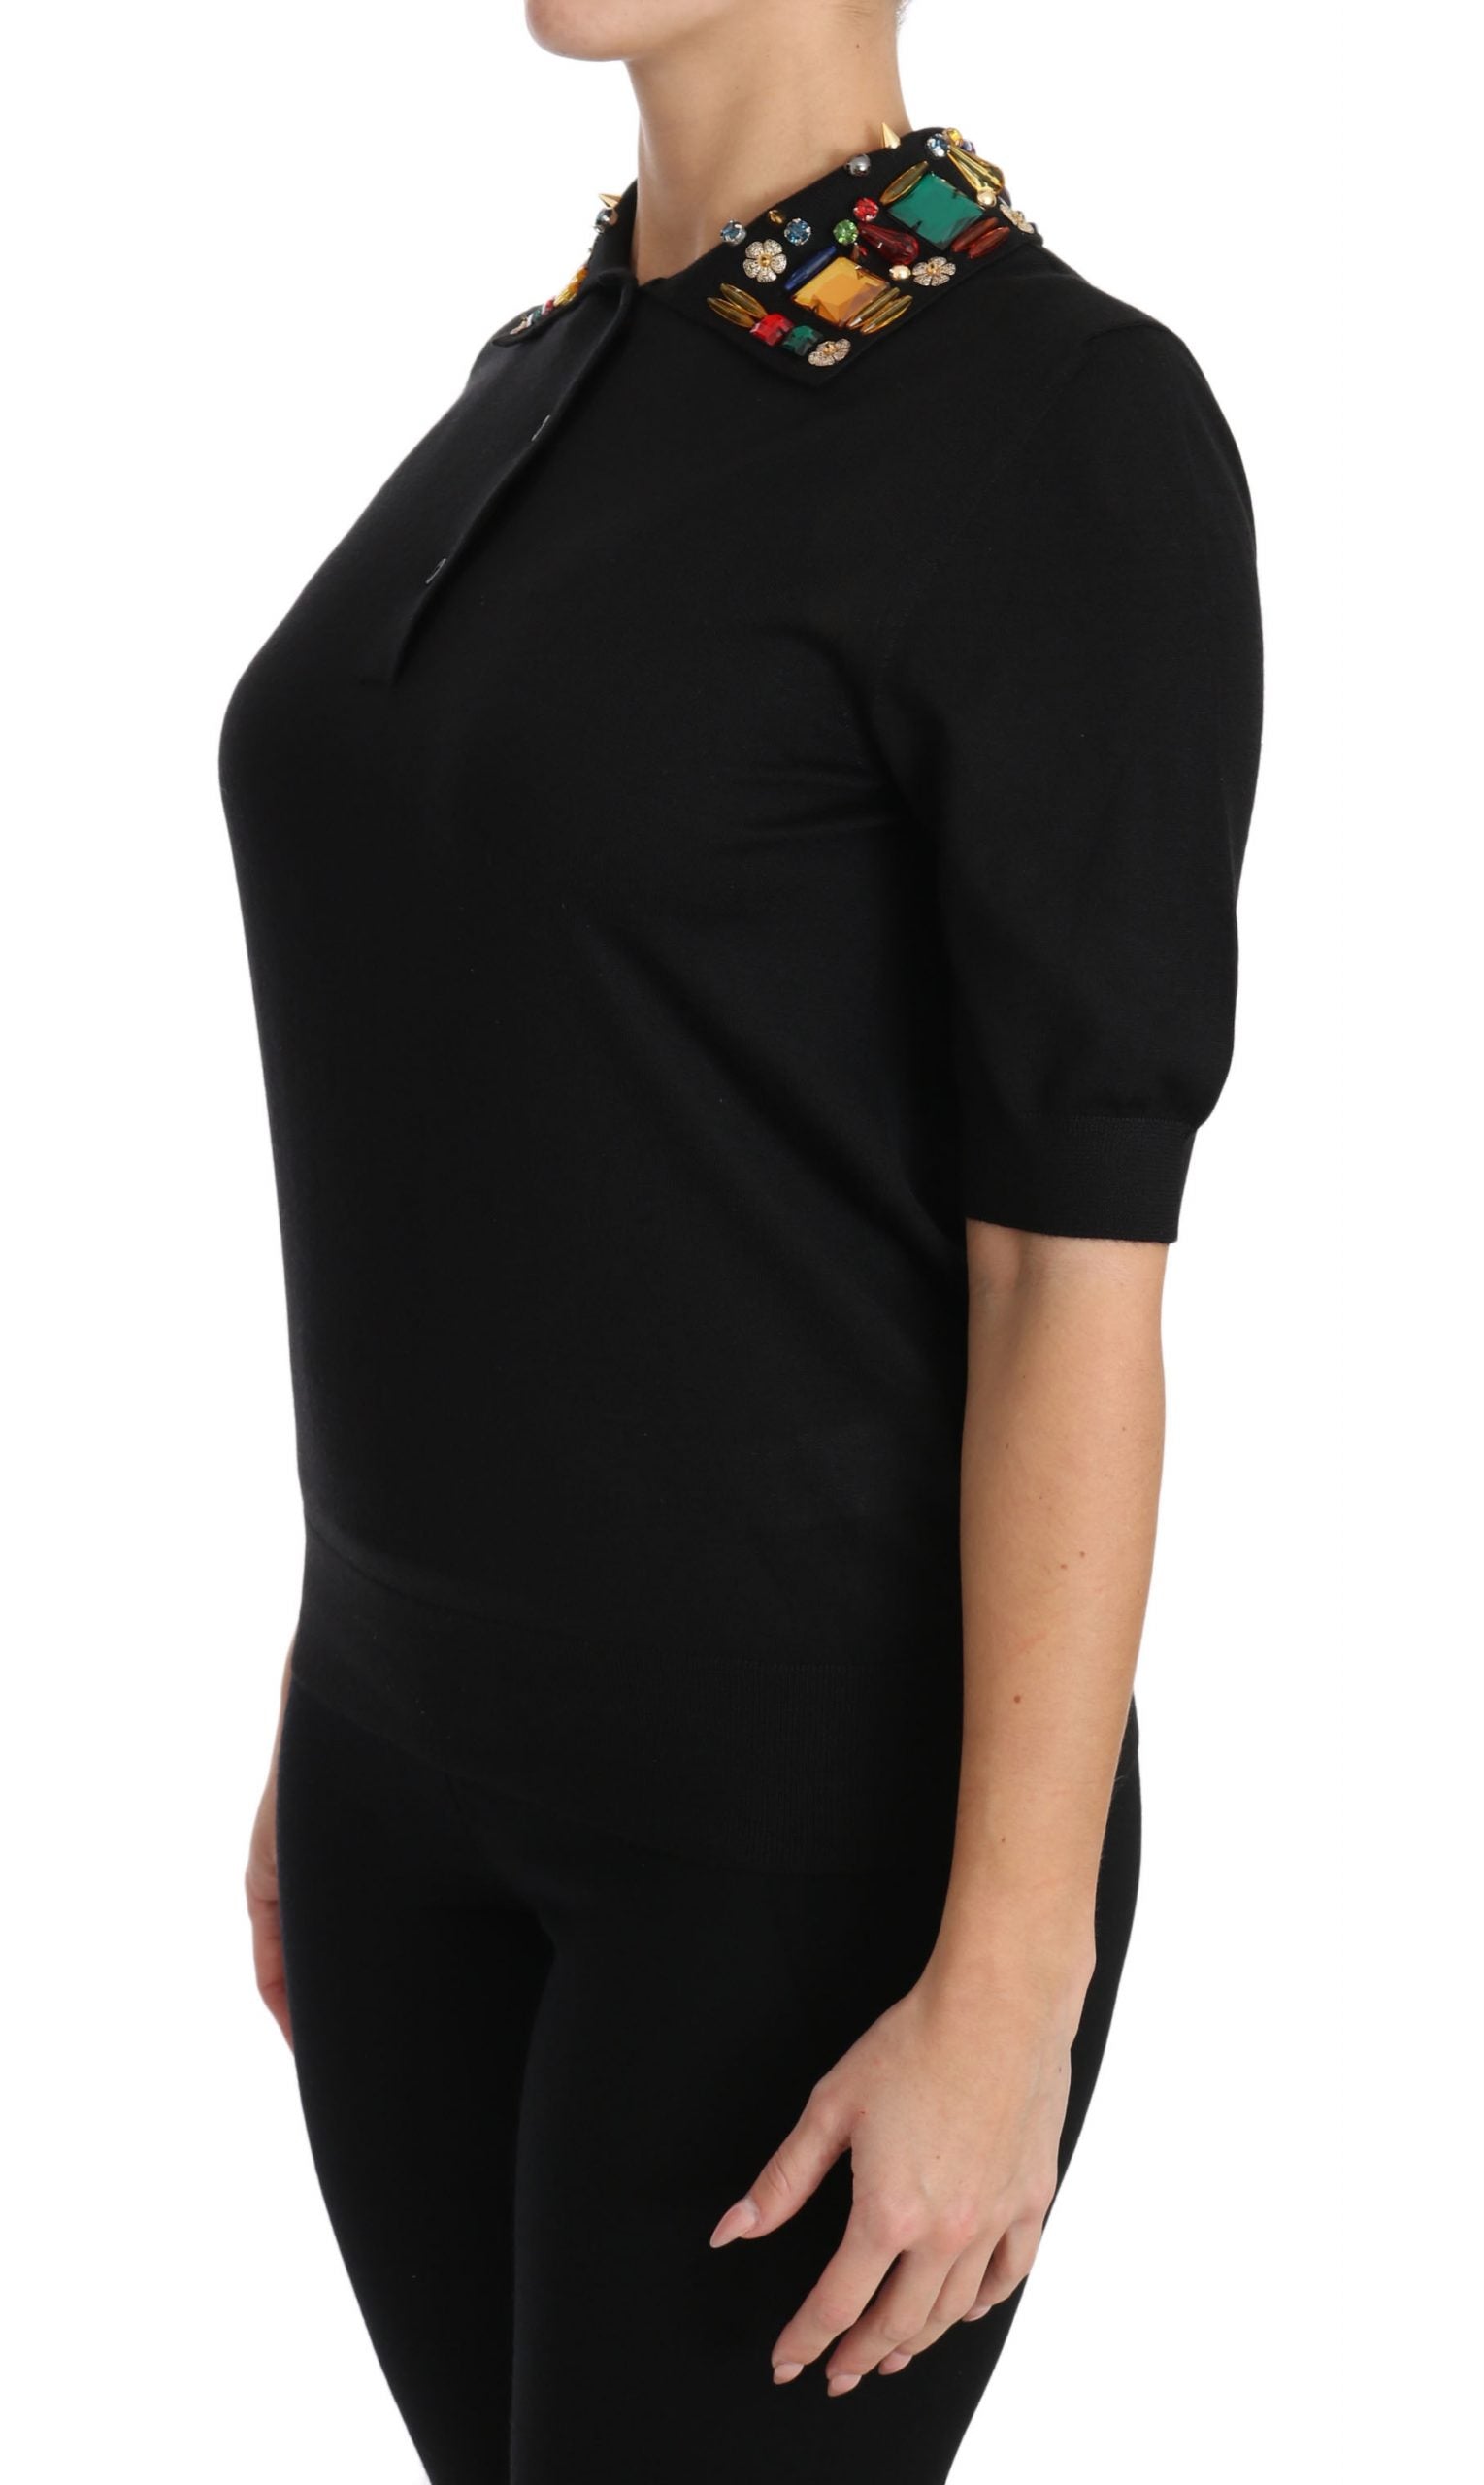 Buy Black Cashmere Crystal Collar Top T-Shirt by Dolce & Gabbana